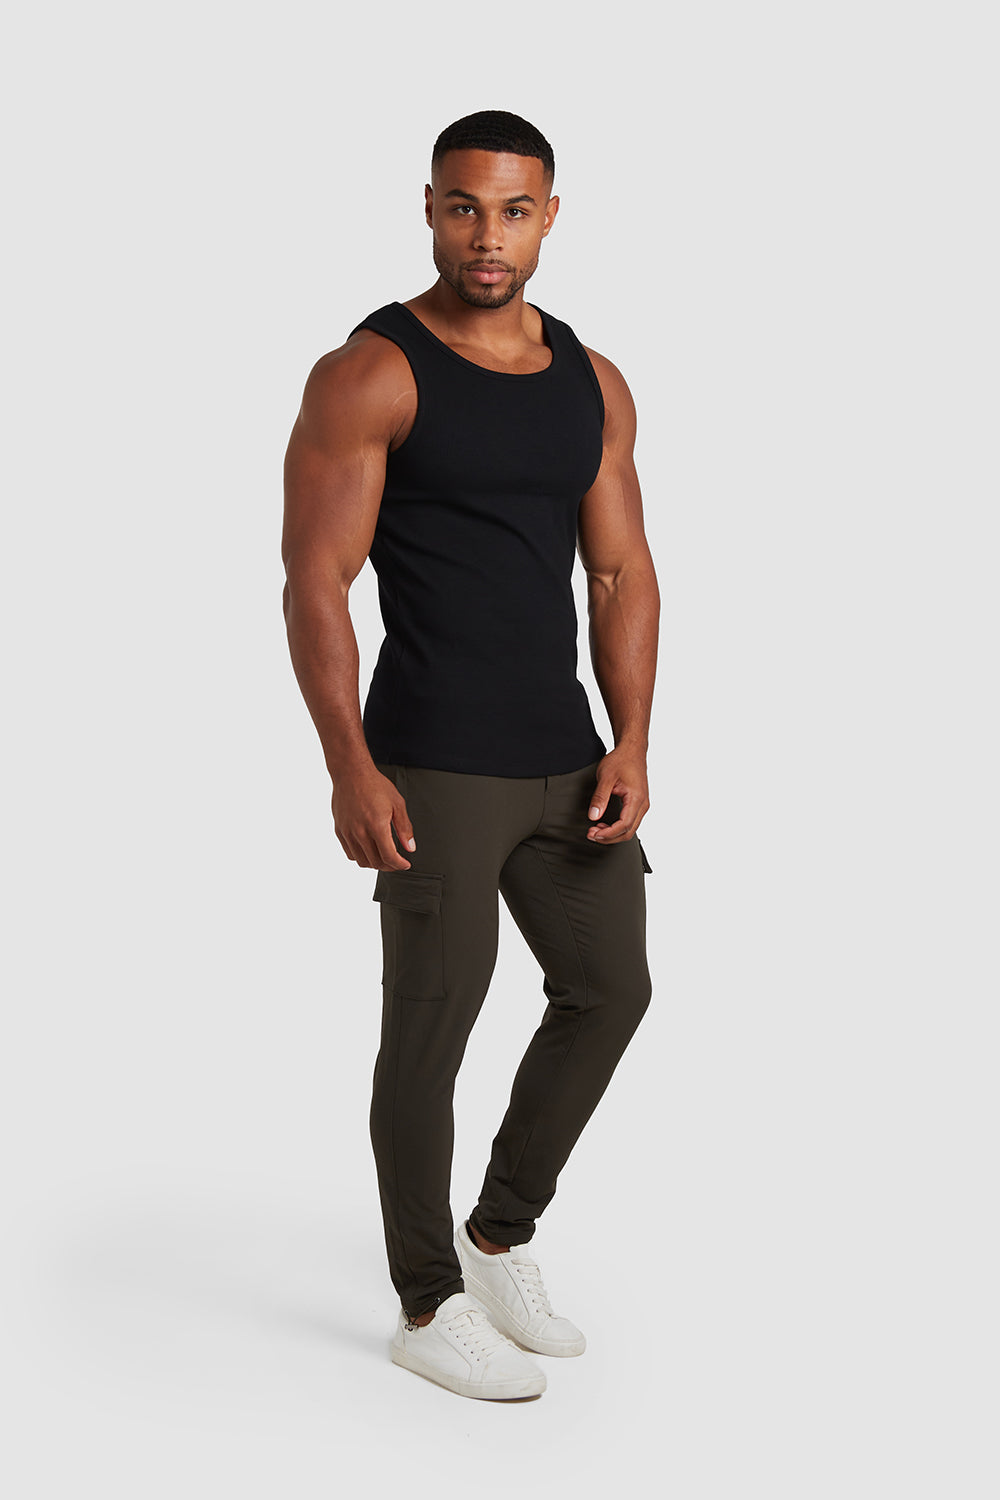 Ribbed Vest In Black, Tailored Athlete Shirts